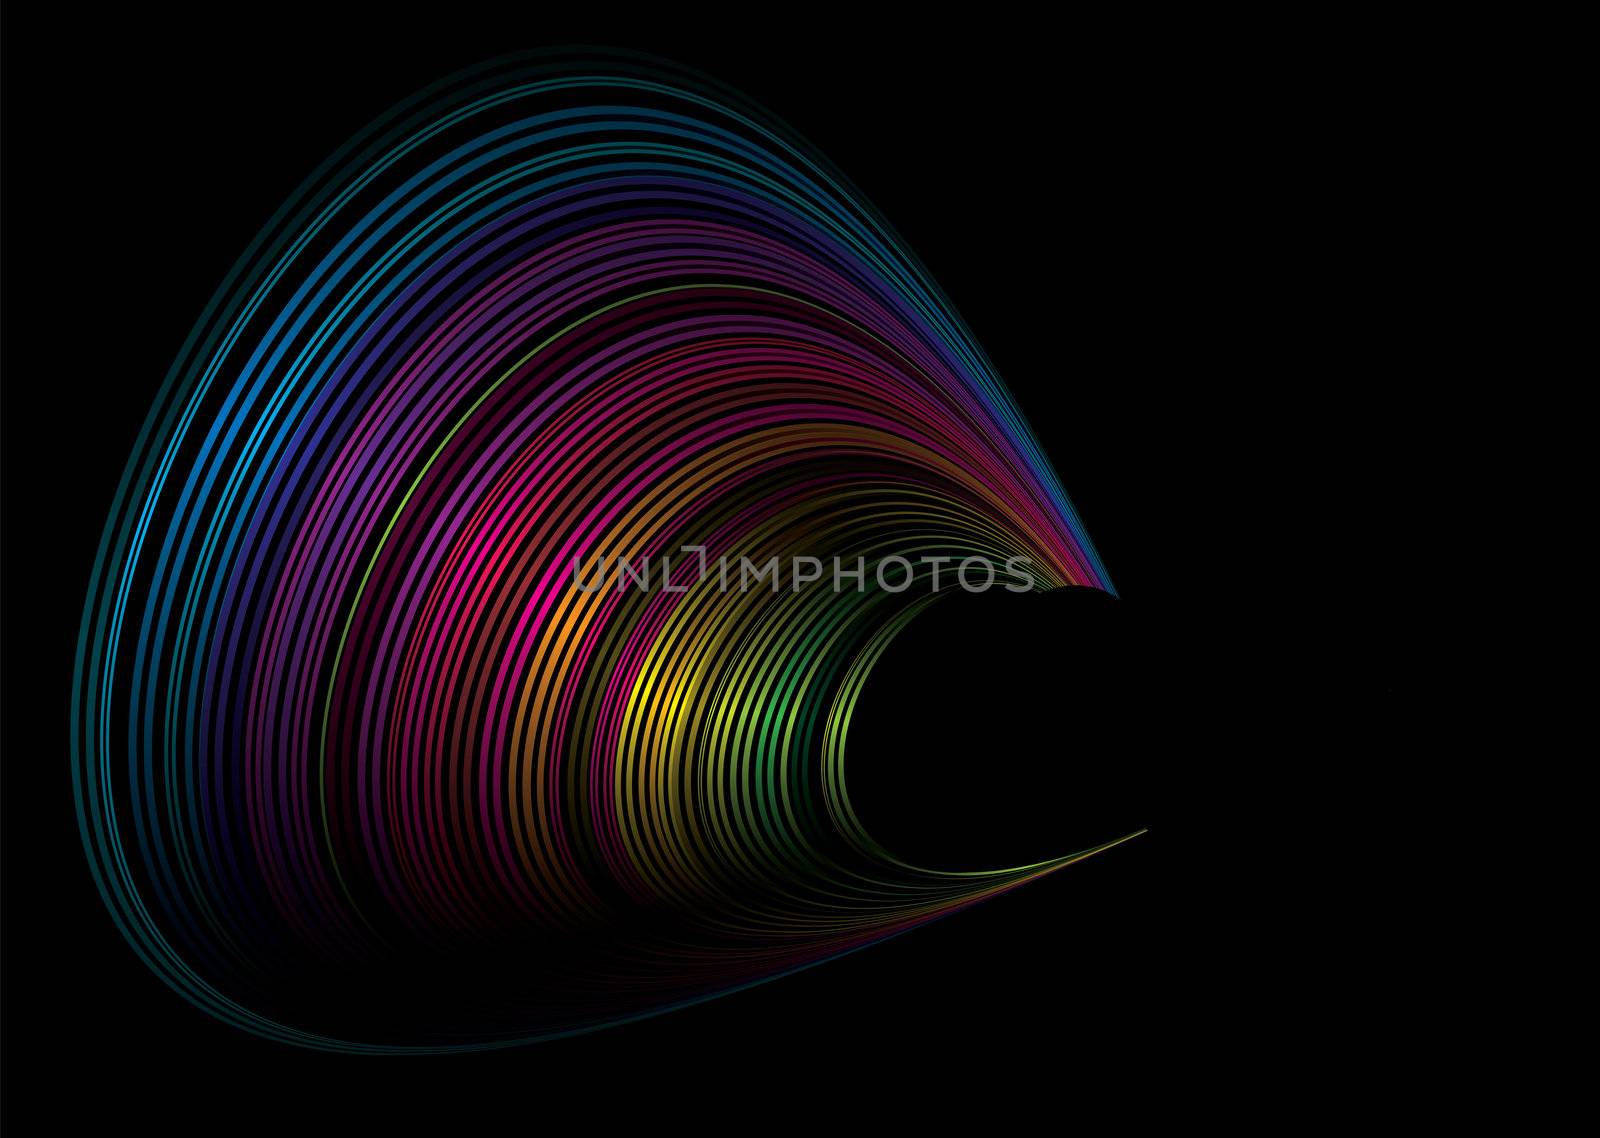 Colorful rainbow illustrated background in a wave form